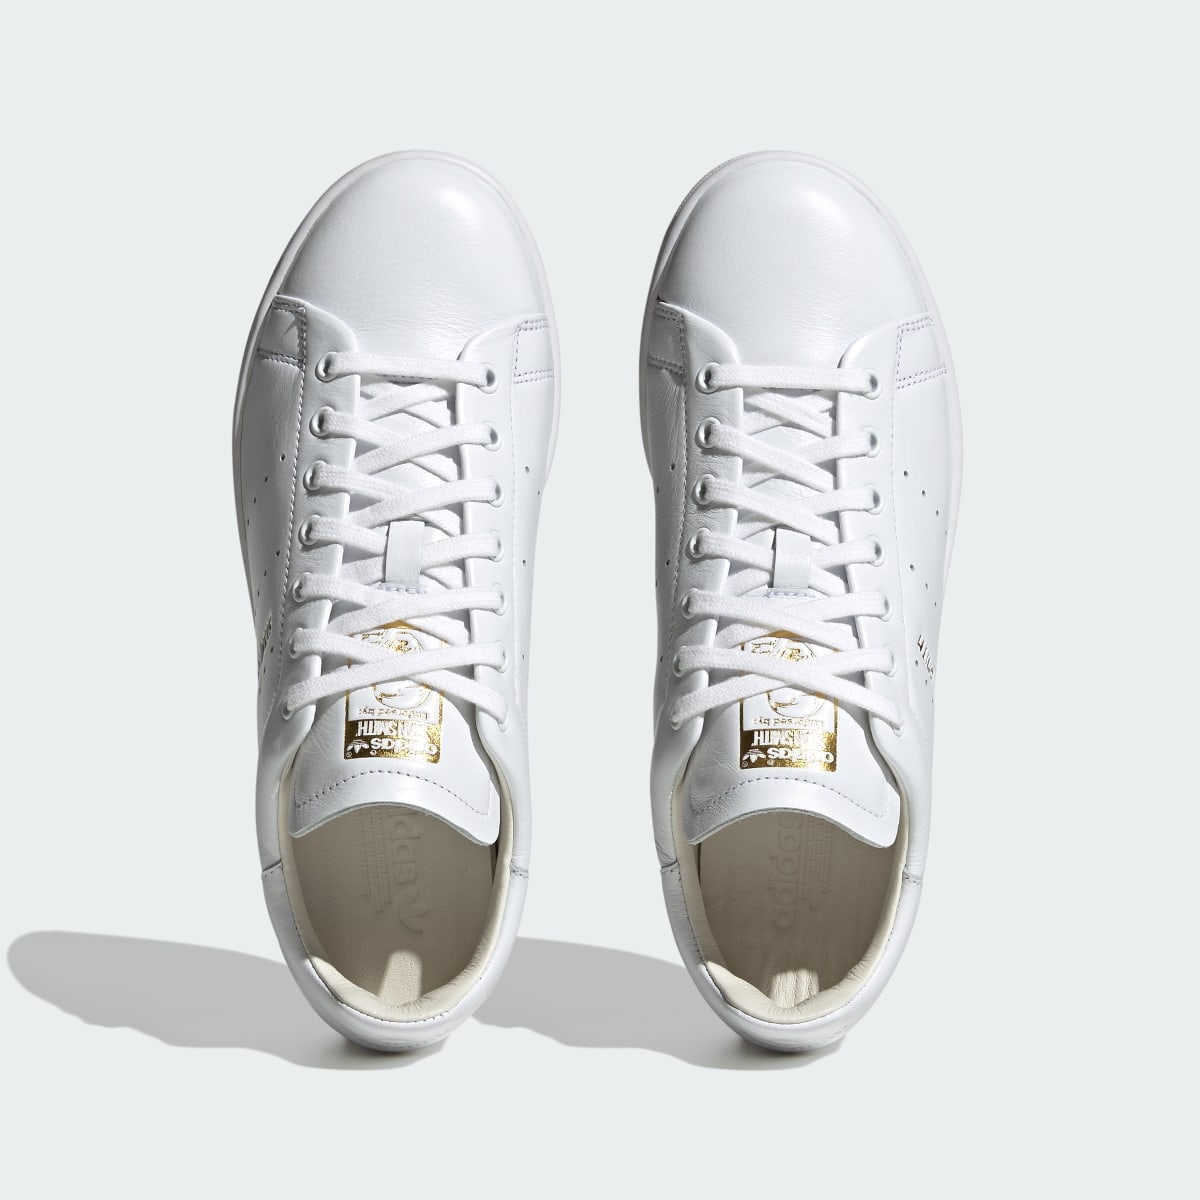 Adidas Chaussure Stan Smith Luxe. 4